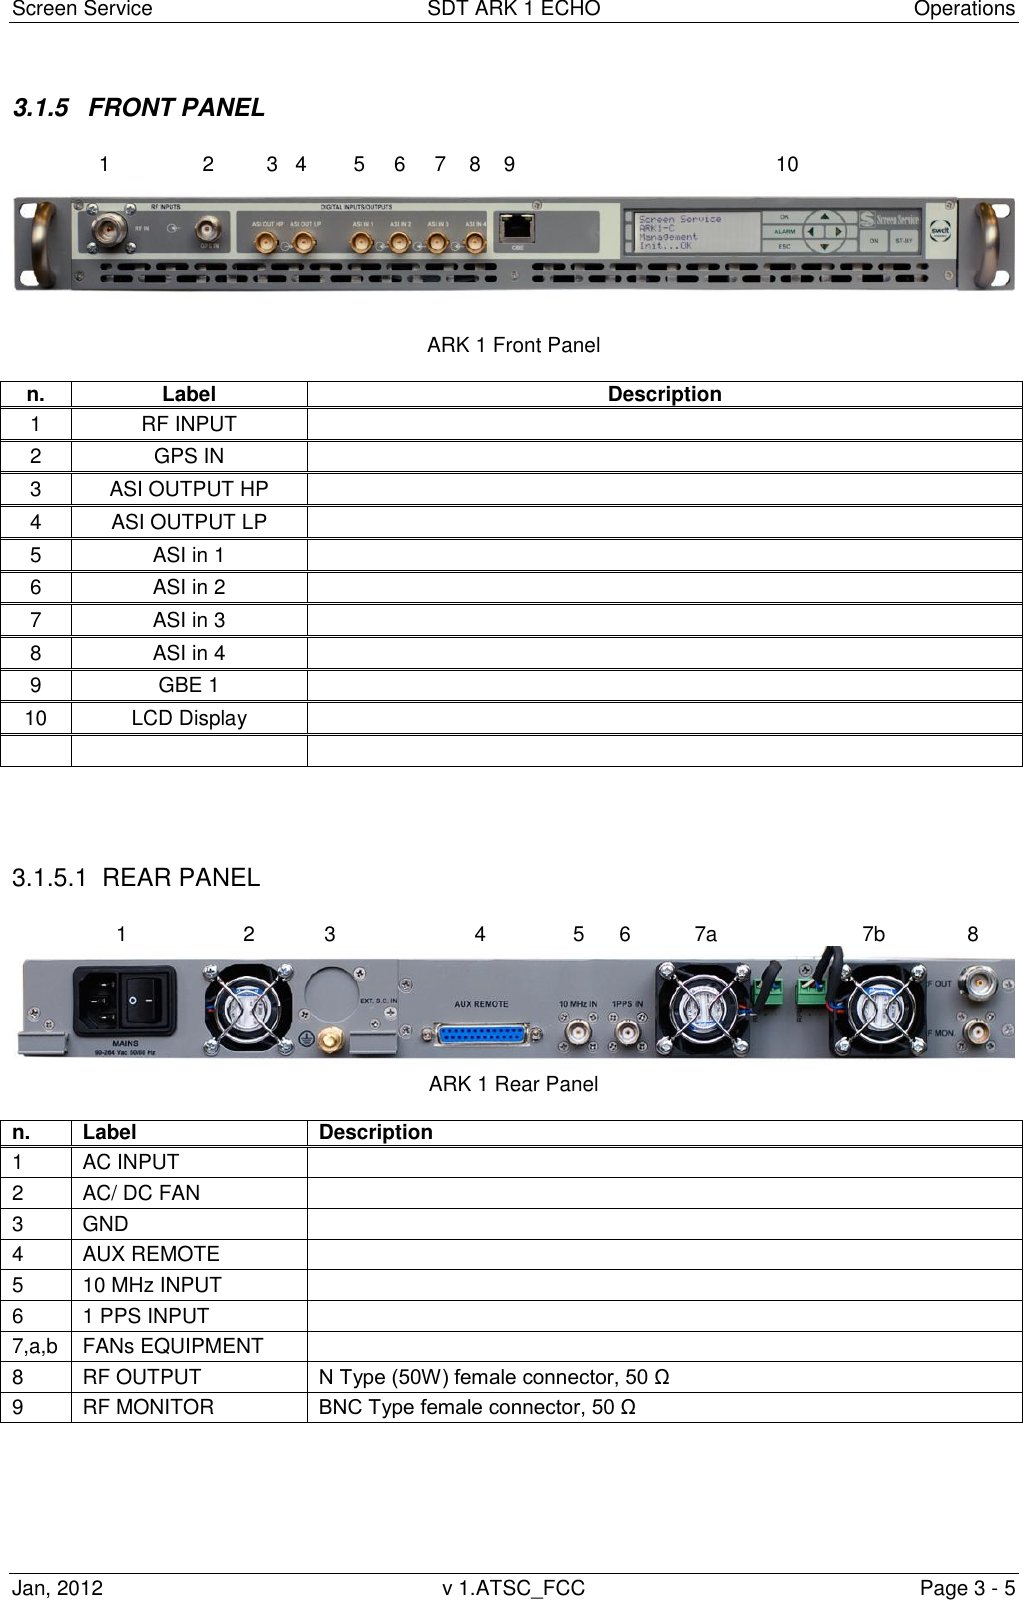 Screen Service  SDT ARK 1 ECHO  Operations Jan, 2012  v 1.ATSC_FCC  Page 3 - 5 3.1.5  FRONT PANEL                 1                2         3   4        5     6     7    8    9                                             10   ARK 1 Front Panel  n. Label Description 1 RF INPUT  2 GPS IN  3 ASI OUTPUT HP  4 ASI OUTPUT LP  5 ASI in 1  6 ASI in 2  7 ASI in 3  8 ASI in 4  9 GBE 1  10 LCD Display                                           3.1.5.1  REAR PANEL                    1                    2            3                        4               5      6           7a                         7b              8  ARK 1 Rear Panel  n.  Label Description 1 AC INPUT  2 AC/ DC FAN  3 GND  4 AUX REMOTE  5 10 MHz INPUT  6 1 PPS INPUT  7,a,b FANs EQUIPMENT  8 RF OUTPUT N Type (50W) female connector, 50 Ω 9 RF MONITOR BNC Type female connector, 50 Ω     